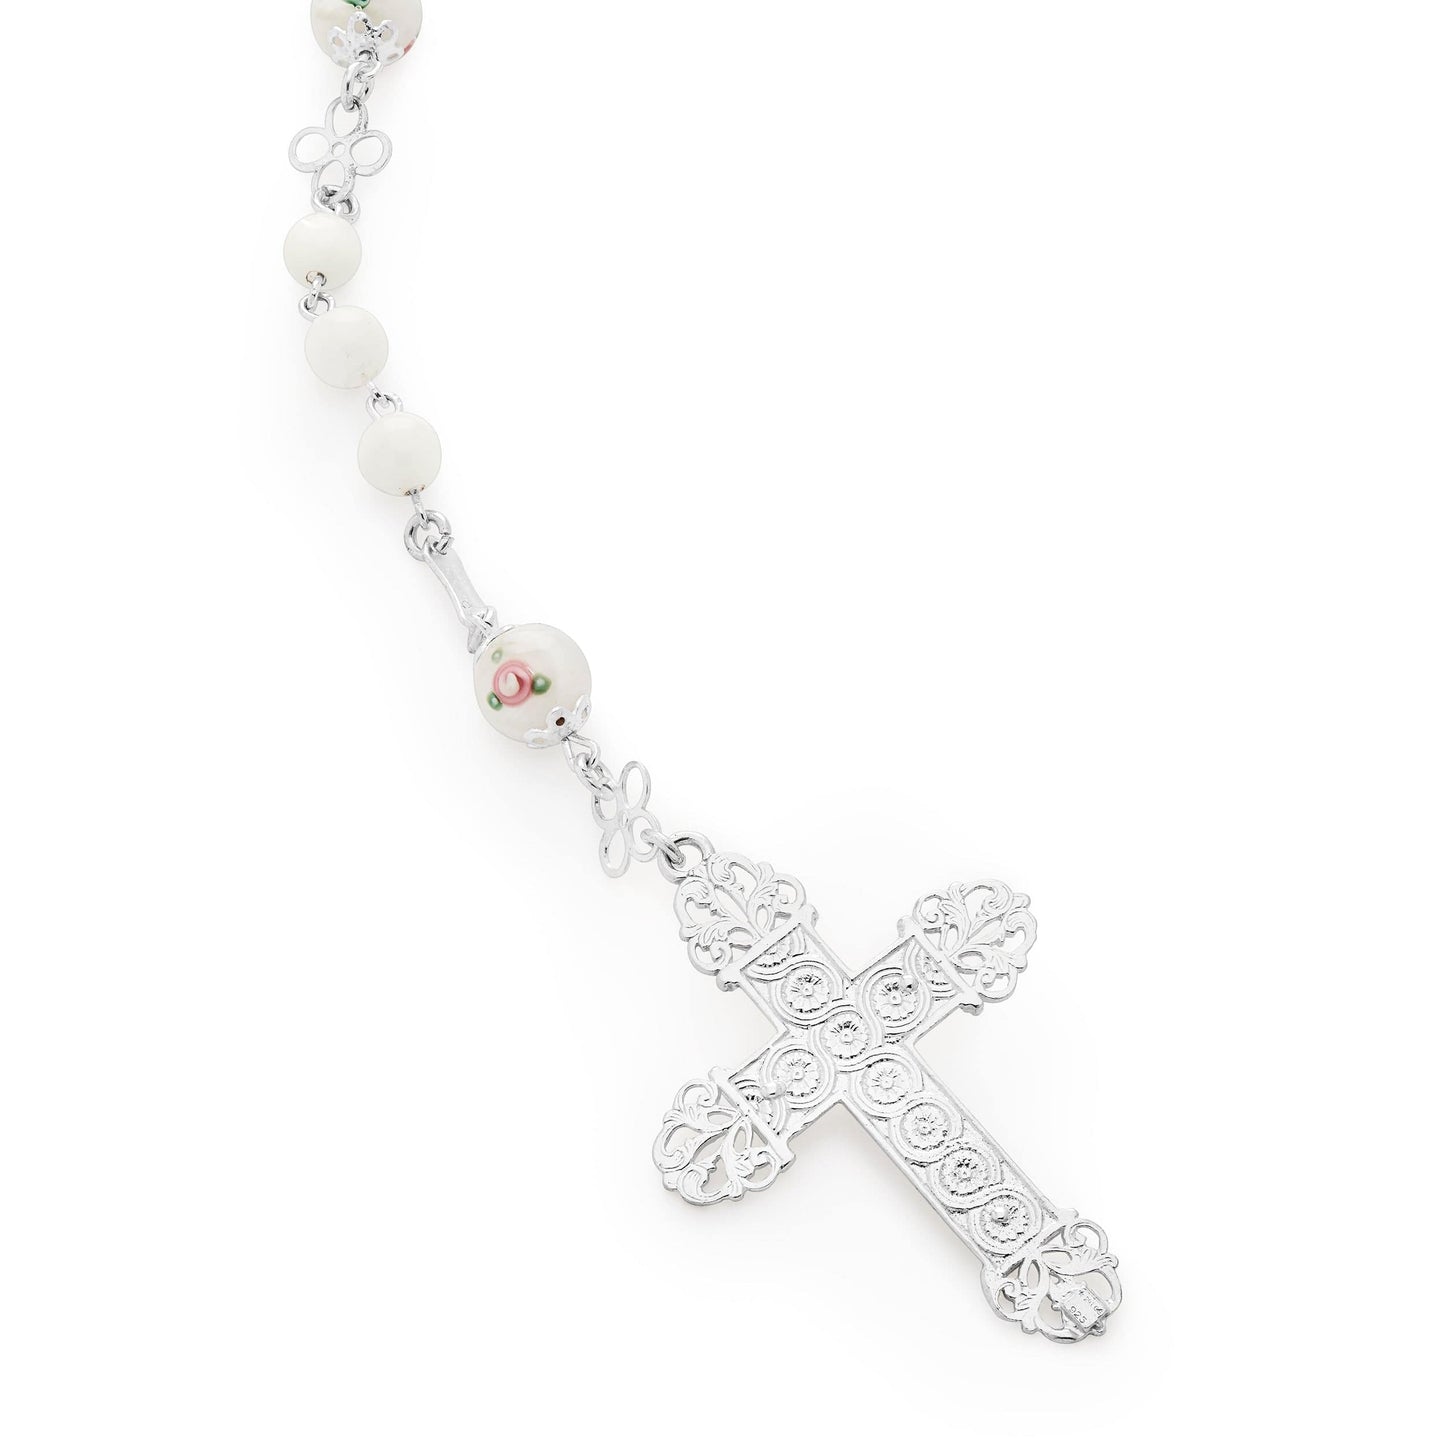 MONDO CATTOLICO Prayer Beads 51 cm (20.07 in) / 4 mm (0.15 in) Sterling Silver Miraculous Mary Wedding Rosary